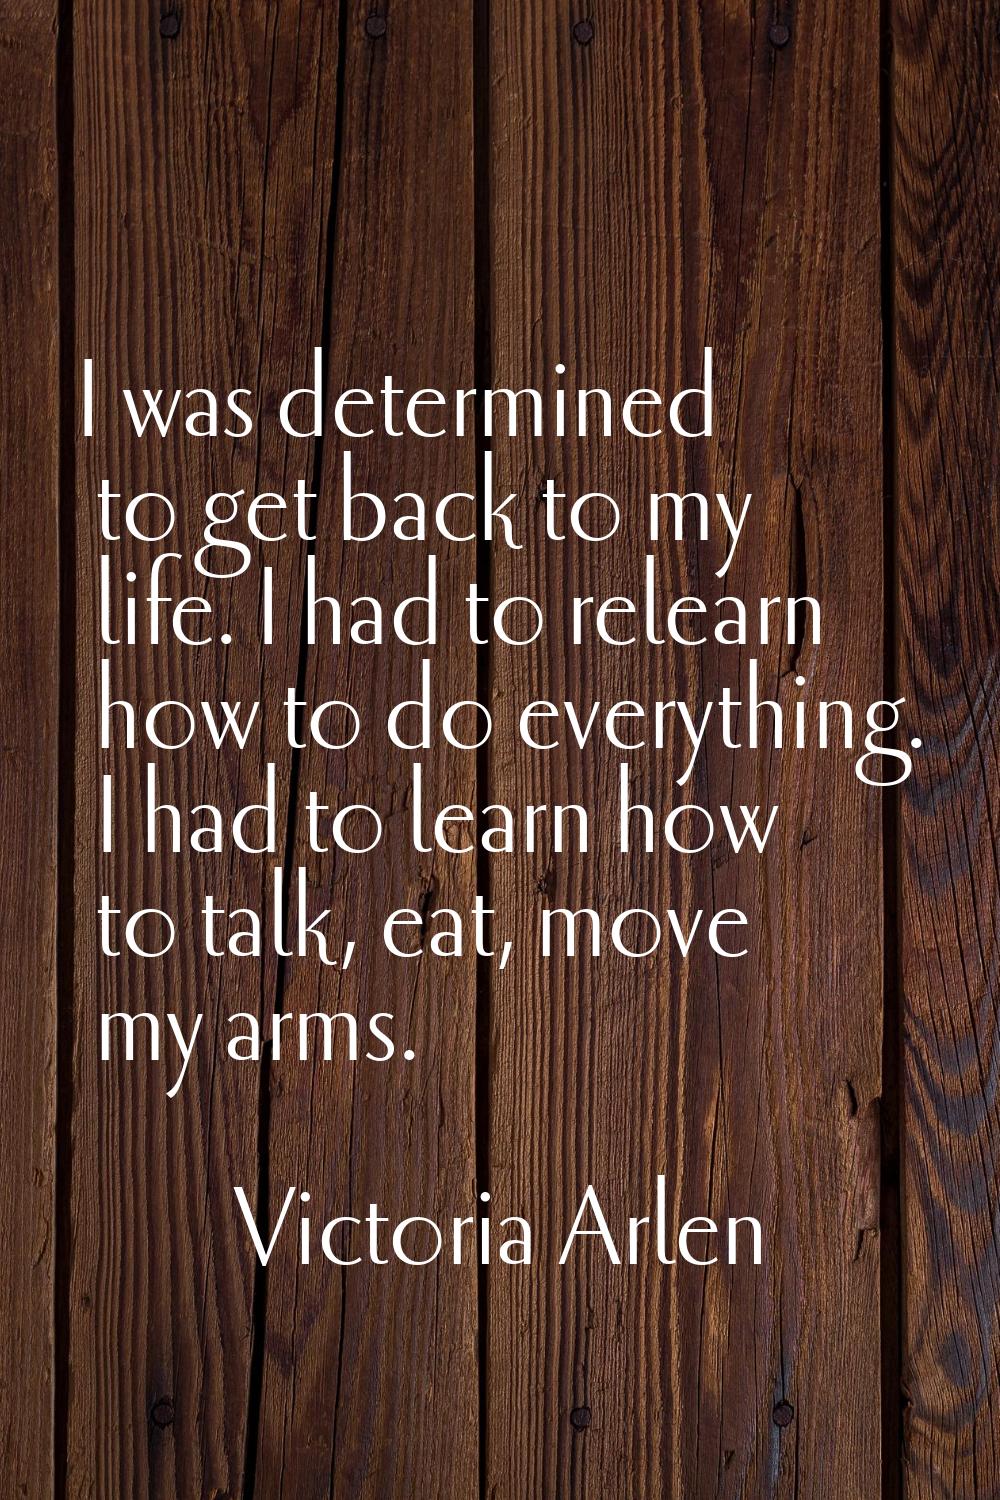 I was determined to get back to my life. I had to relearn how to do everything. I had to learn how 